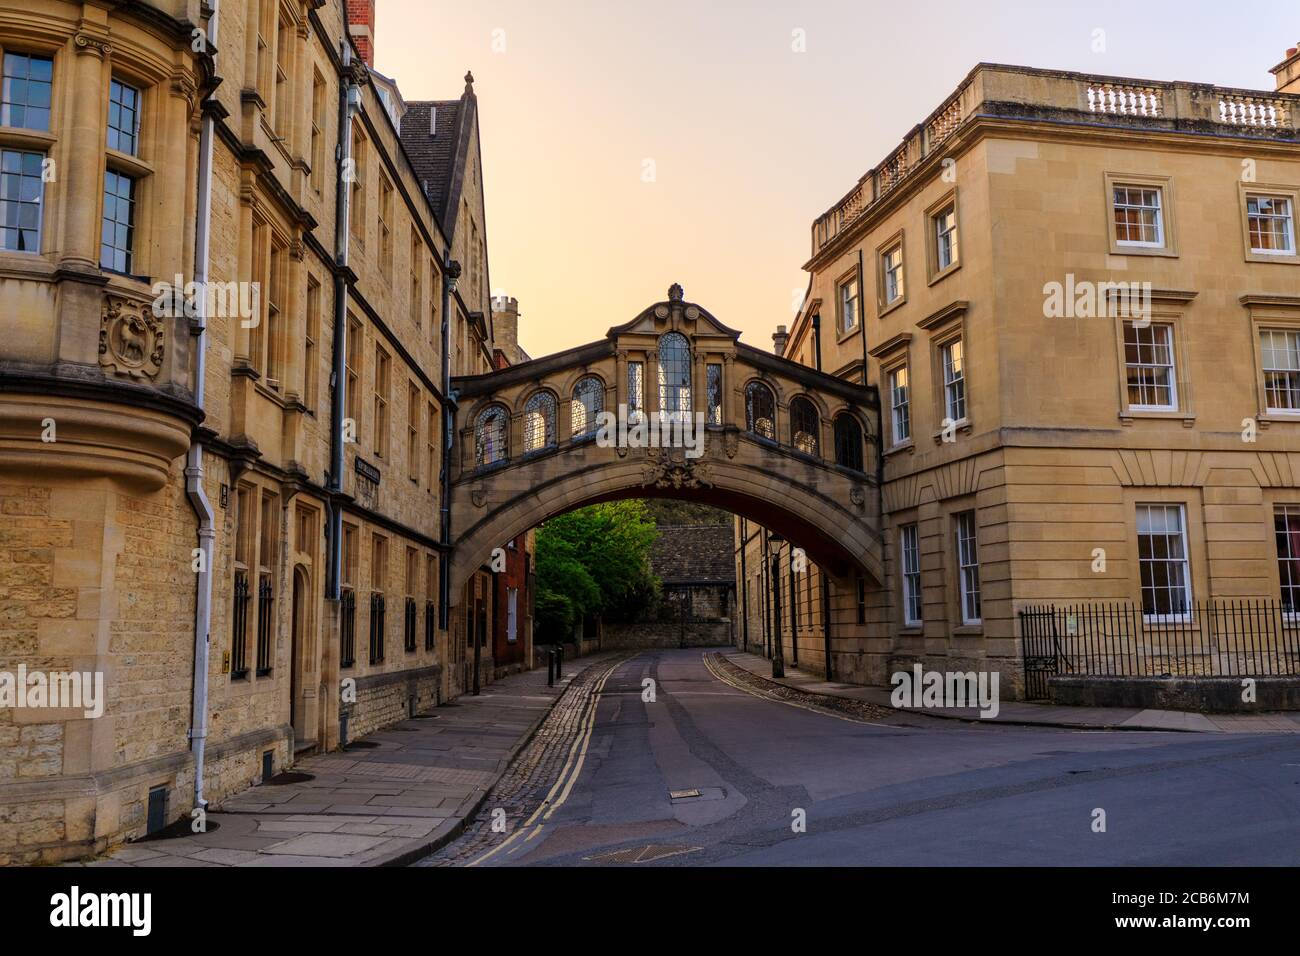 Hertford Bridge, Bridge of Sighs, in Oxford at sunrise with no people around, early in the morning on a clear day with blue sky. Oxford, England, UK. Stock Photo